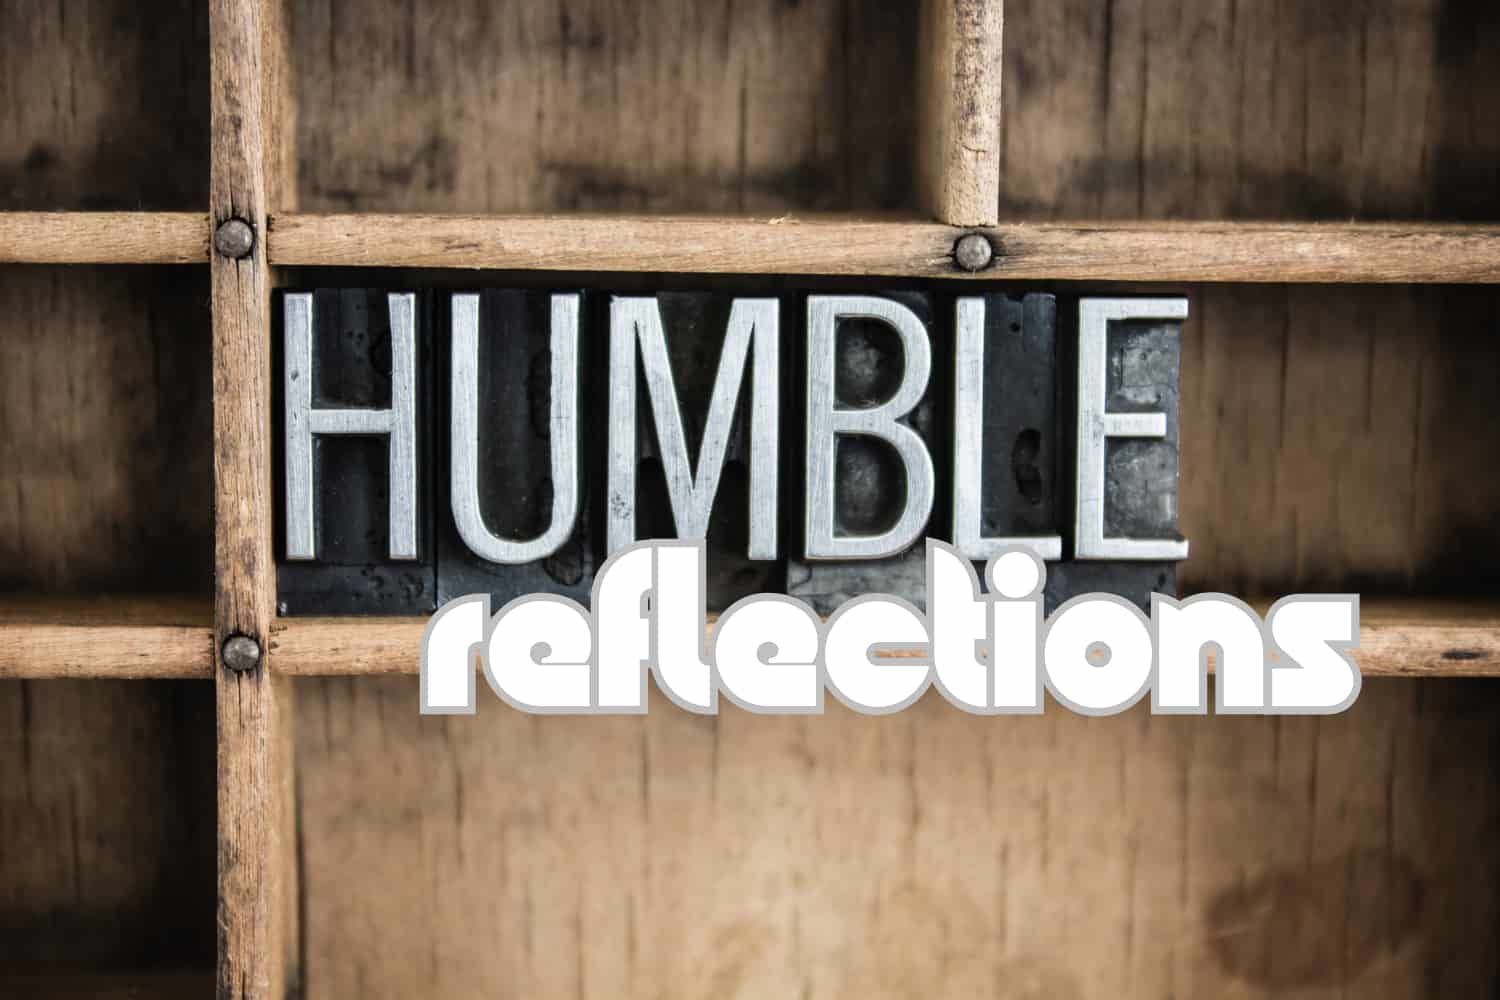 Object%20lesson%20-%20NT%20The%20pharisee%20and%20the%20tax%20collector%20-%20Humble%20reflections-5792de36 Jesus - His parables